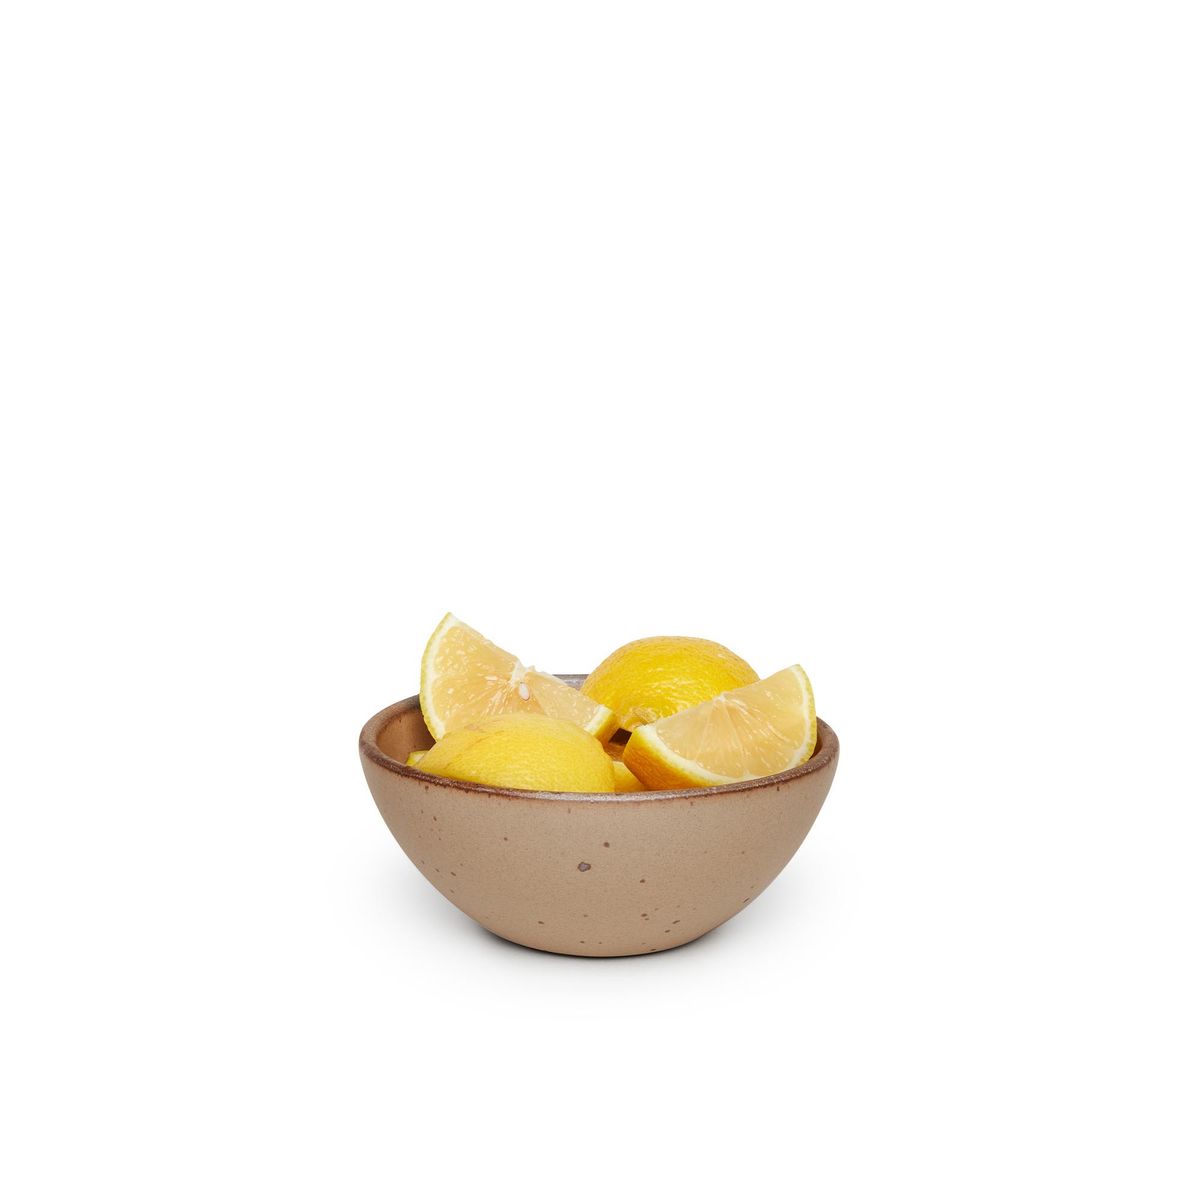 A small dessert sized rounded ceramic bowl in a warm pale brown color featuring iron speckles and an unglazed rim, filled with lemon wedges